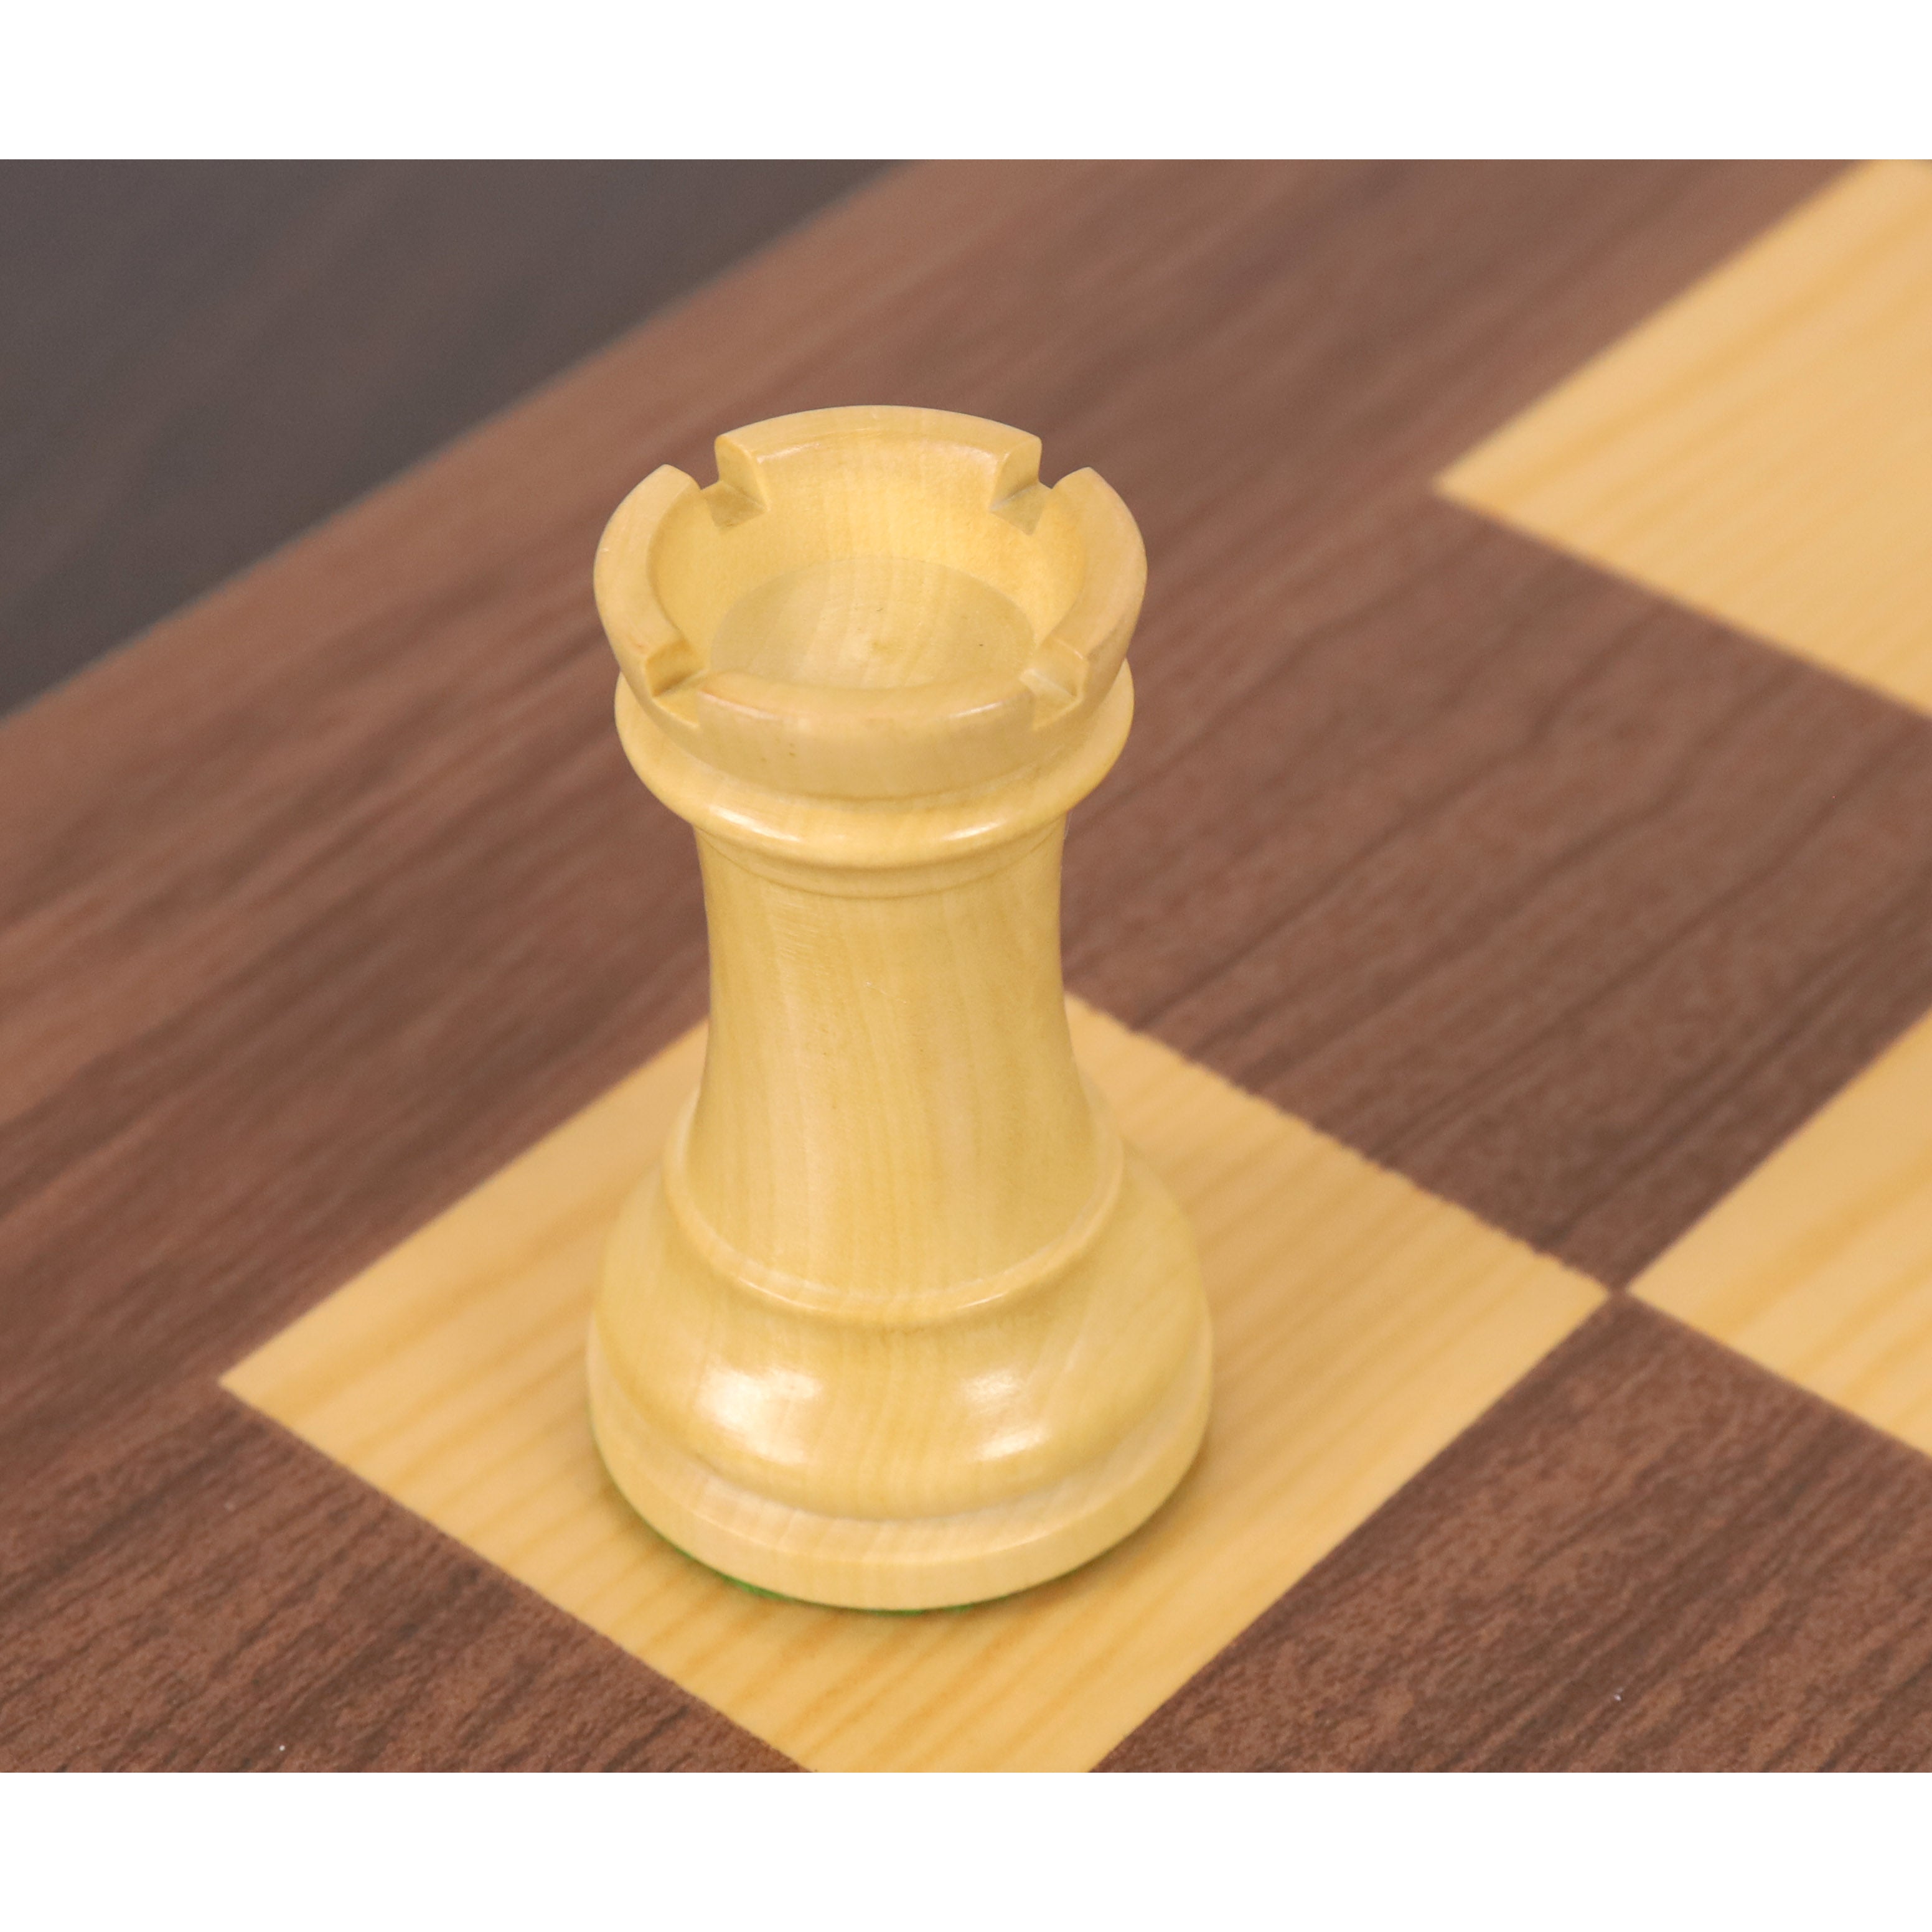 Unique Luxury Chess Sets with High End Boards & Pieces - Henry Chess Sets